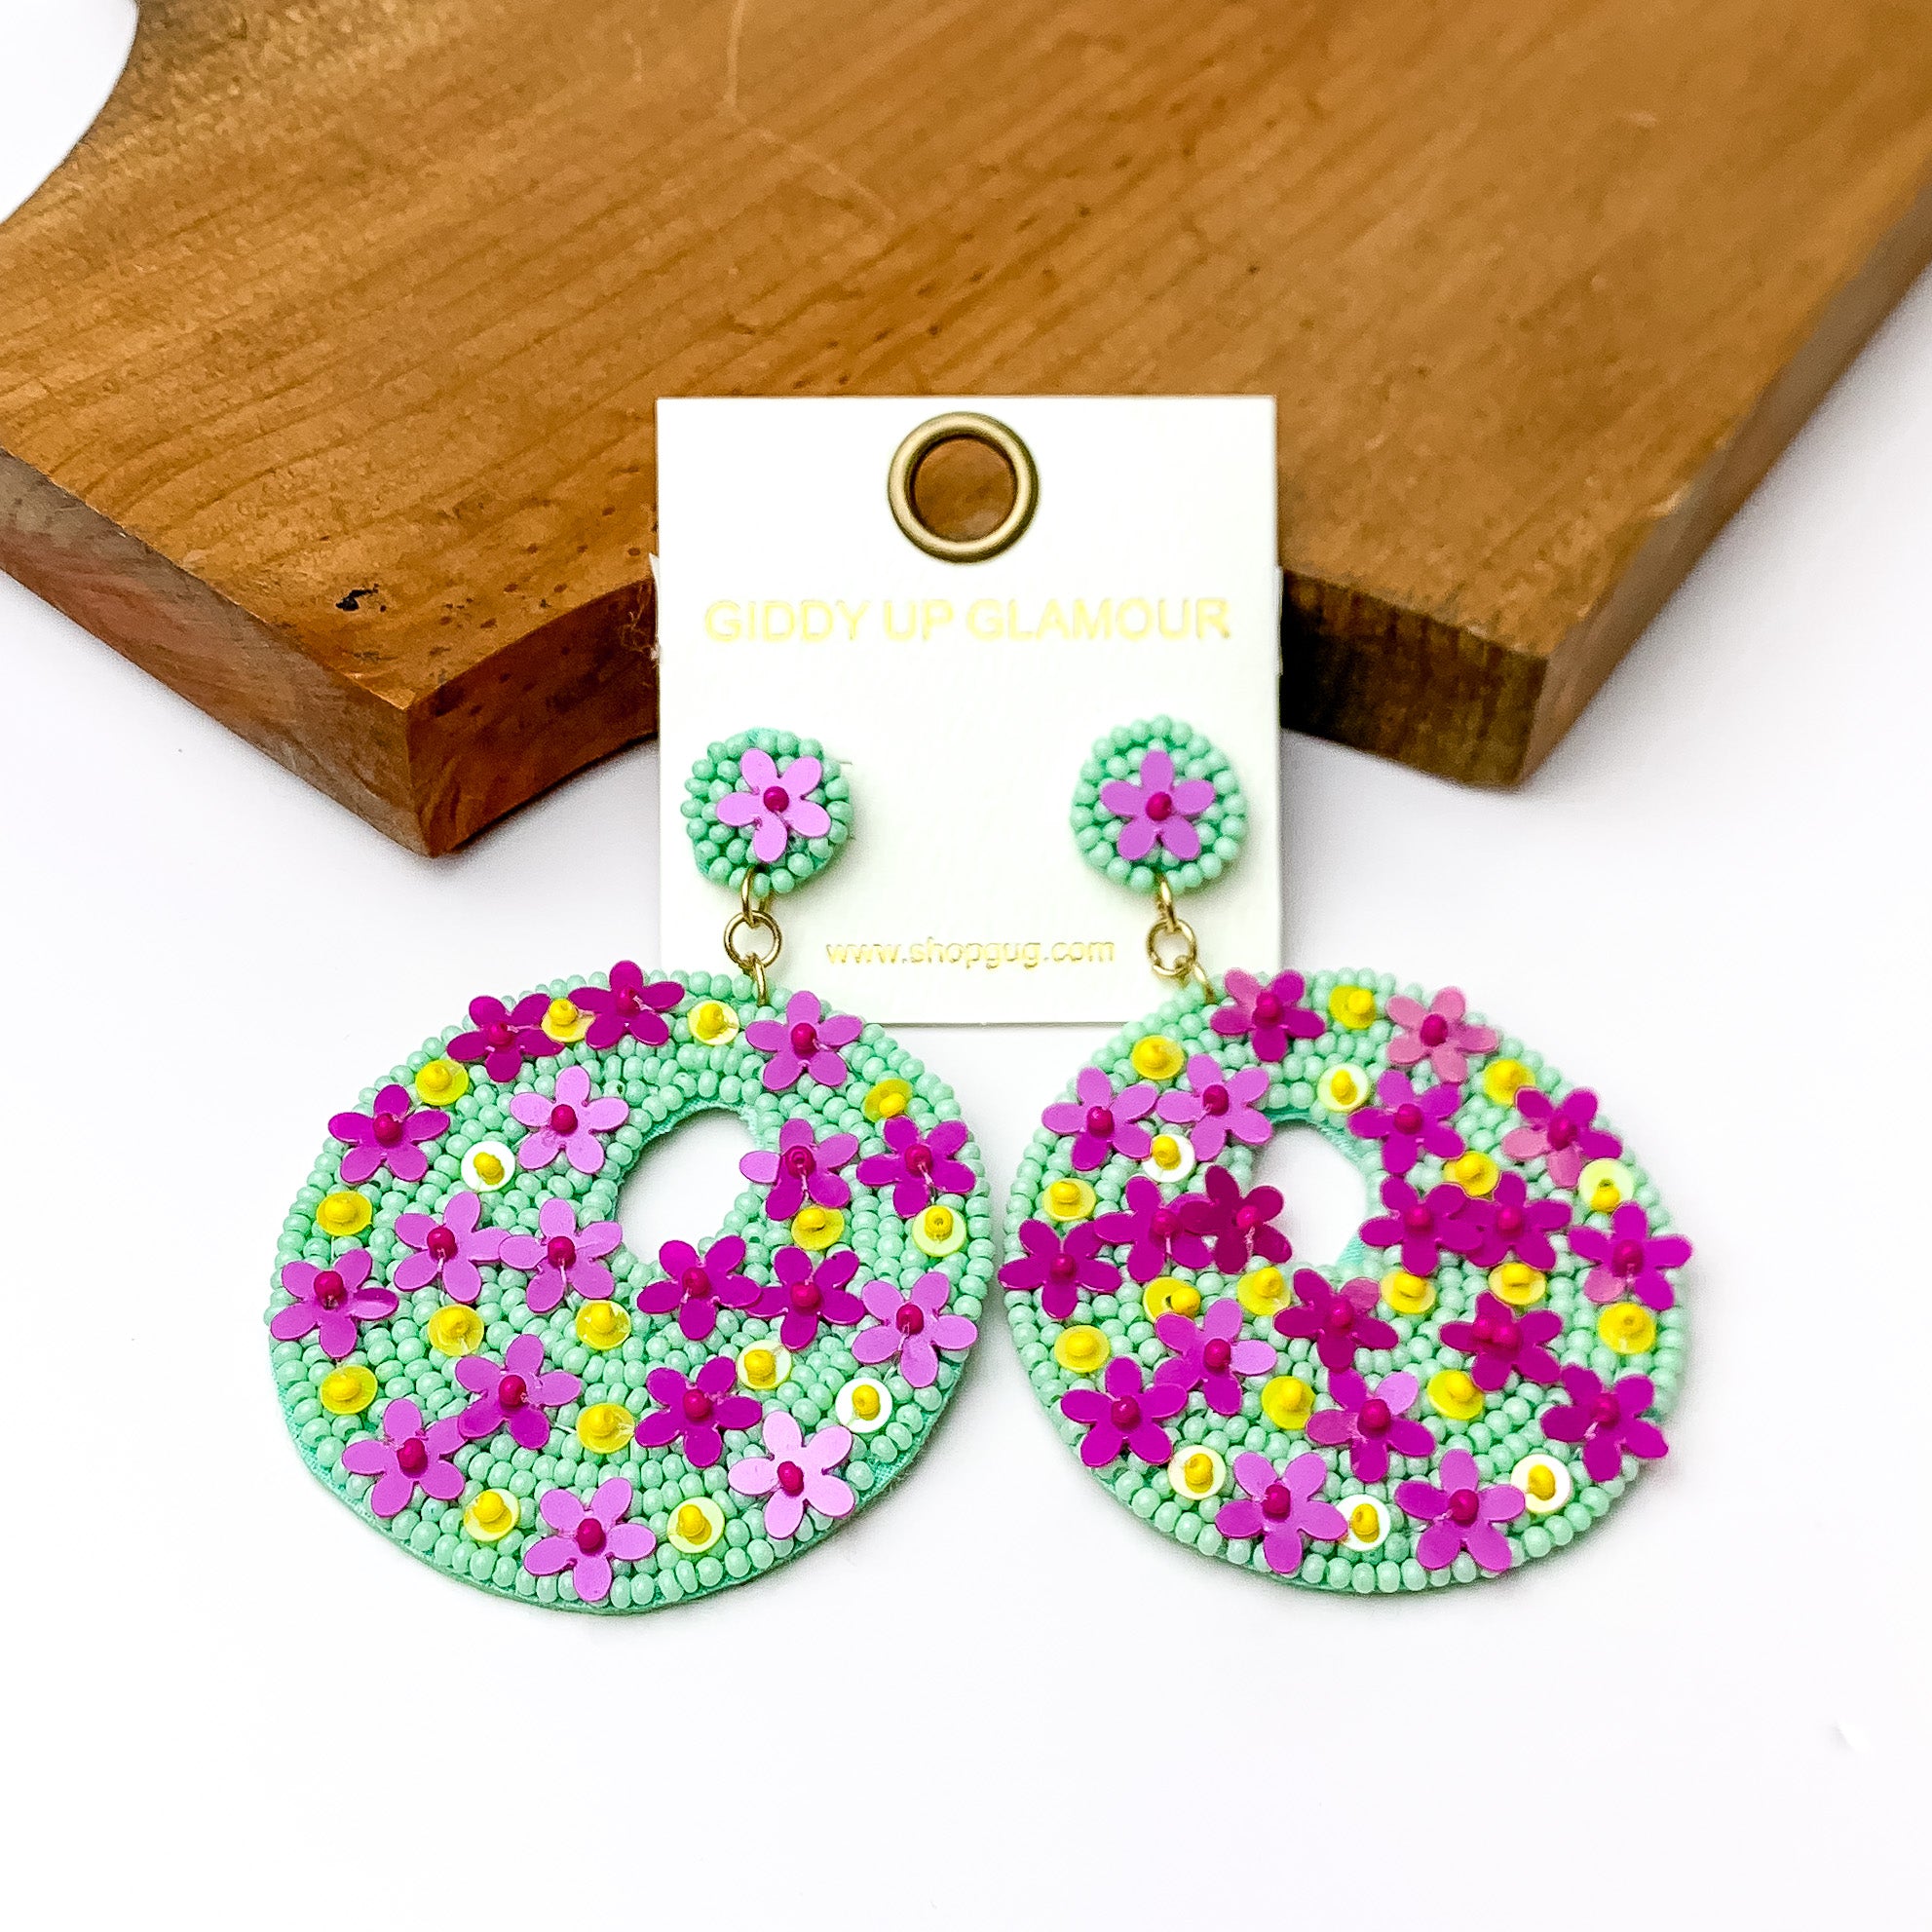 Mint green Beaded Circular Drop Earrings with Floral Designs. Pictured on a white background with a wood piece at the top. 